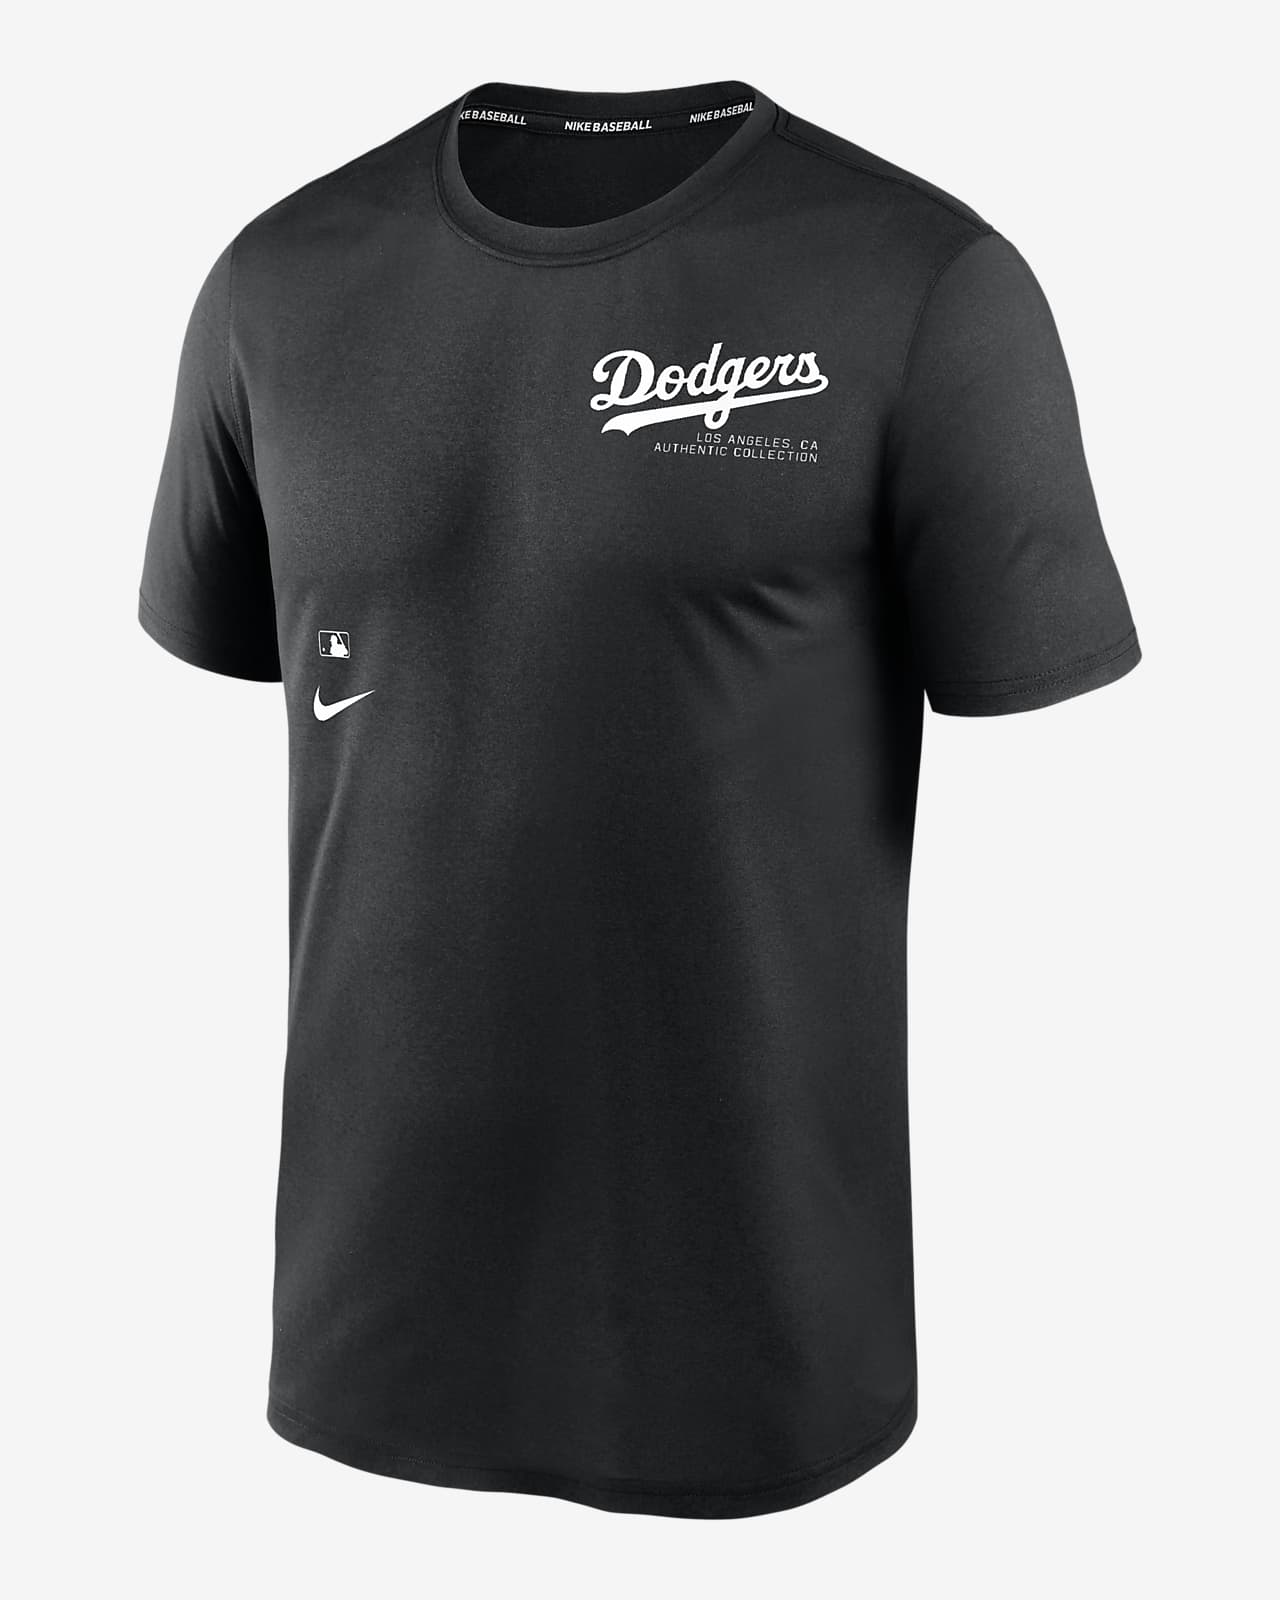 Los Angeles Dodgers Authentic Collection Early Work Men’s Nike Dri-FIT MLB T-Shirt